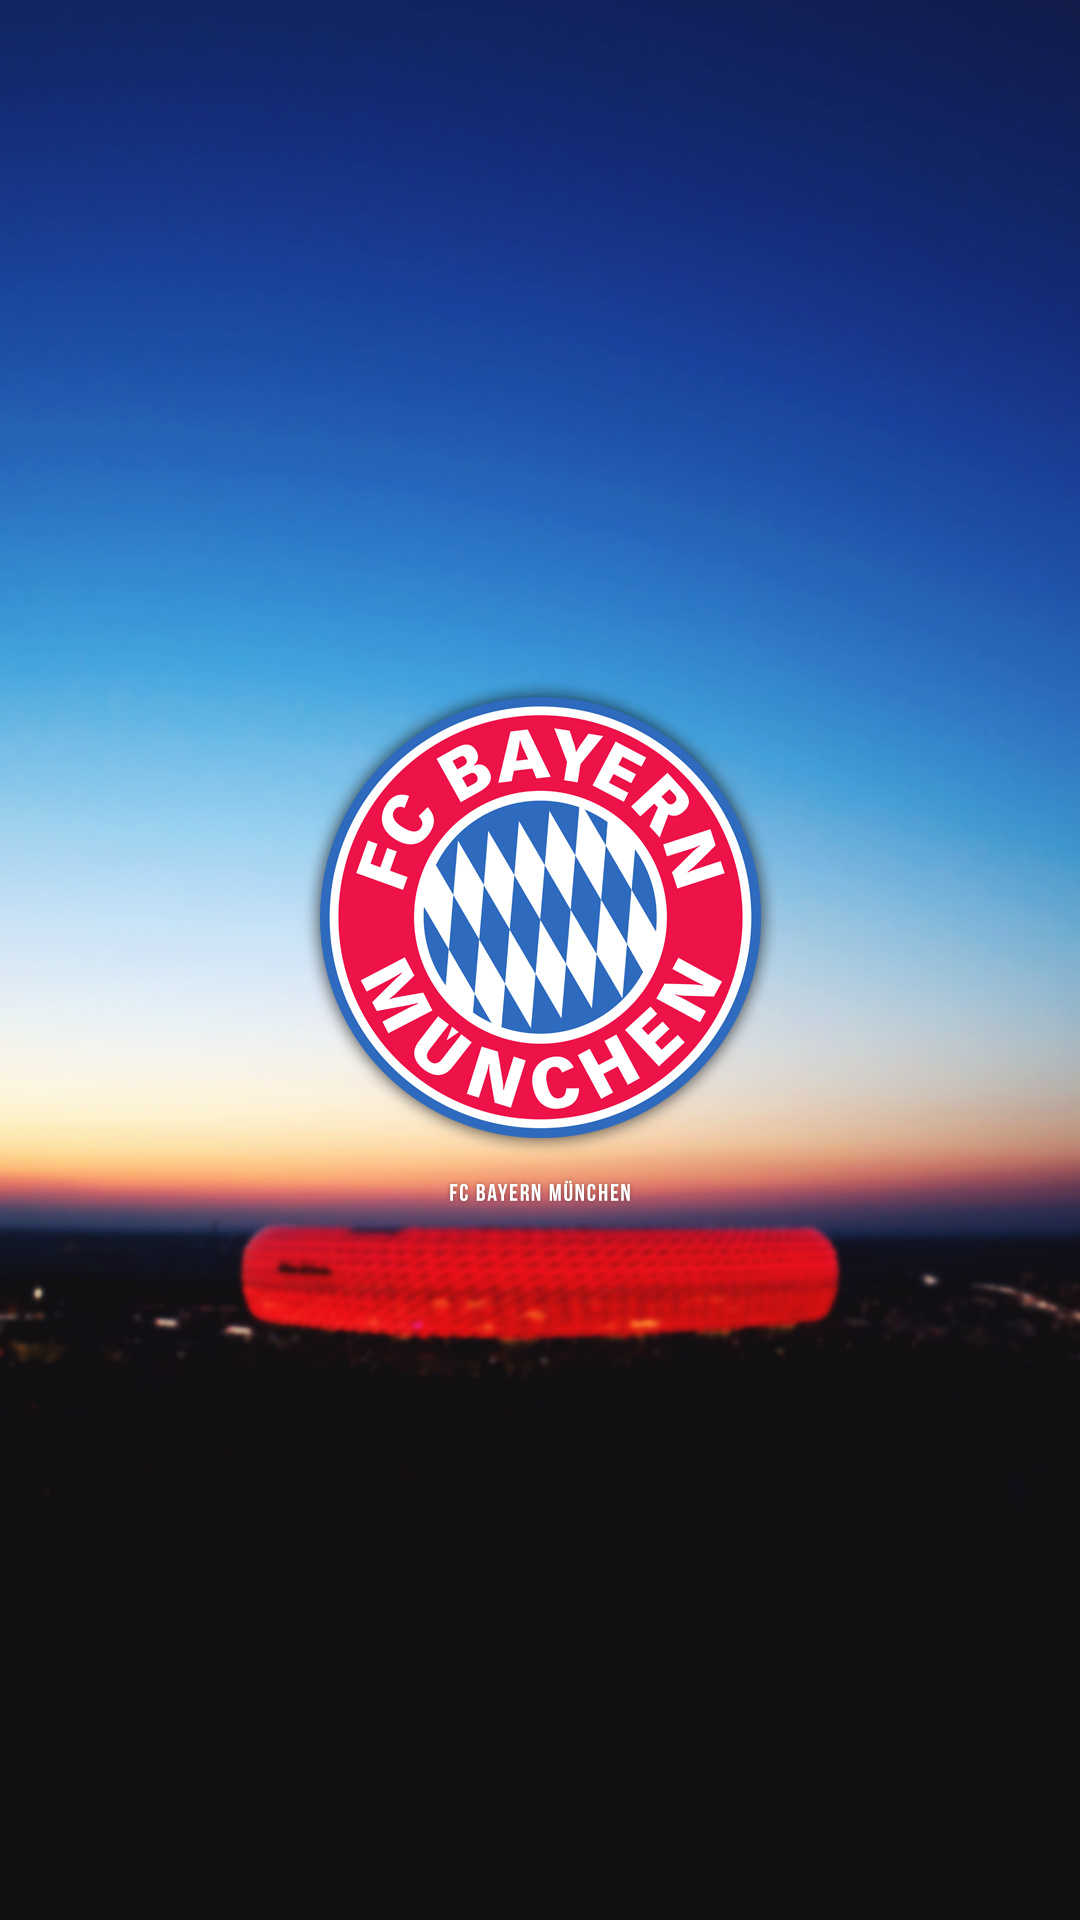 Bayern Munchen FC: The strongest team in Germany, Founded in 1900. 1080x1920 Full HD Background.